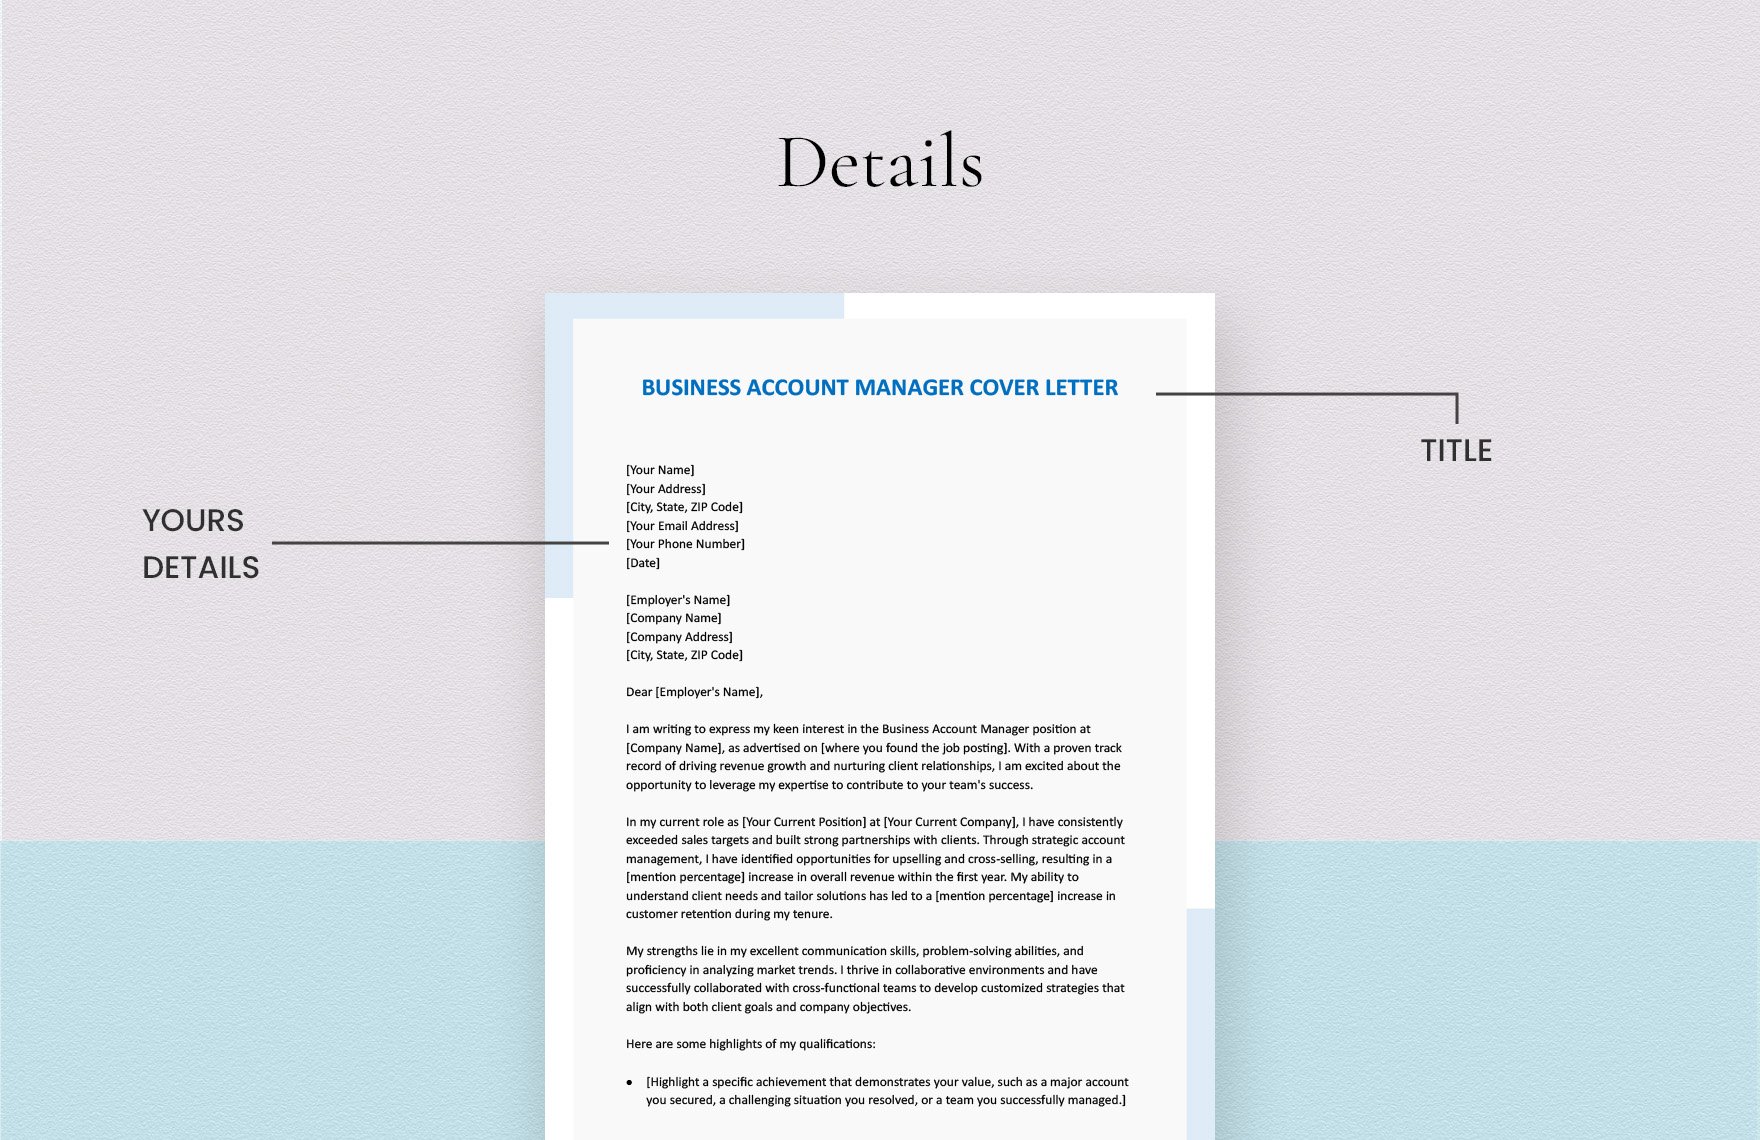 Business Account Manager Cover Letter